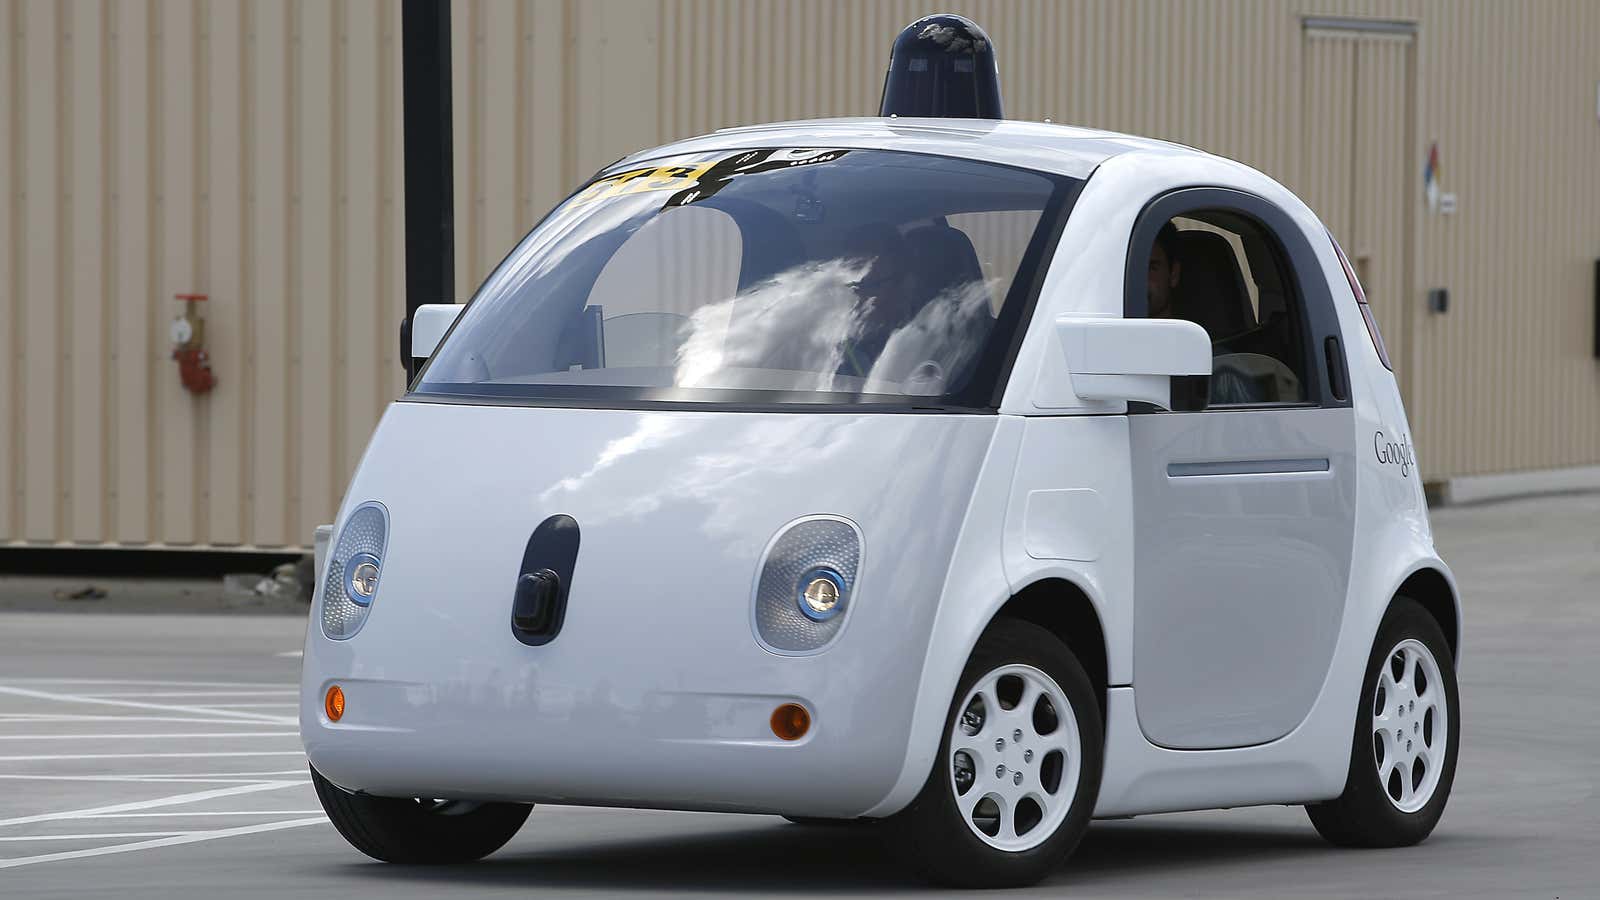 Google’s new self-driving prototype car drives around a parking lot during a demonstration at Google campus on Wednesday, May 13, 2015, in Mountain View, California.